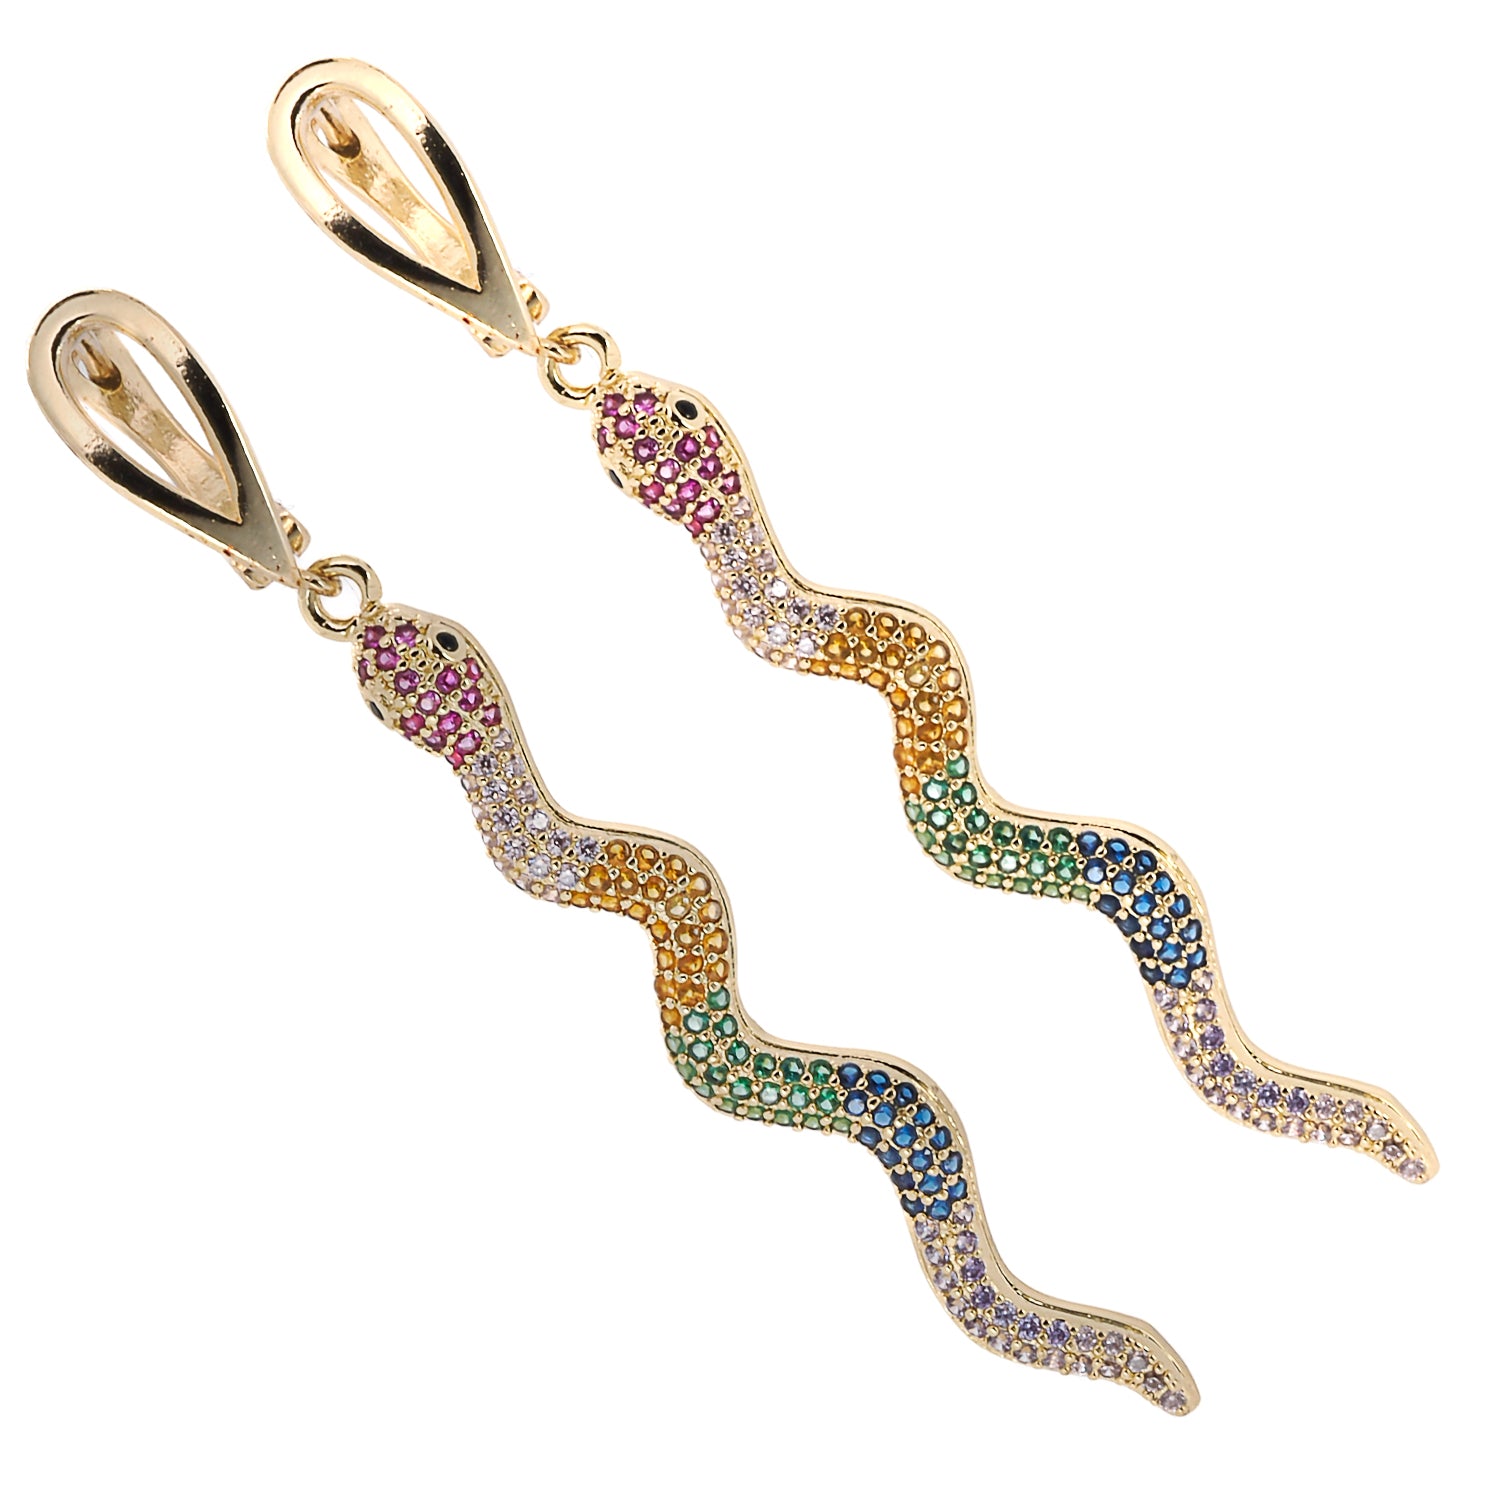 Playful and eye-catching Cheerful Snake Earrings with vibrant multicolor zircon stones.